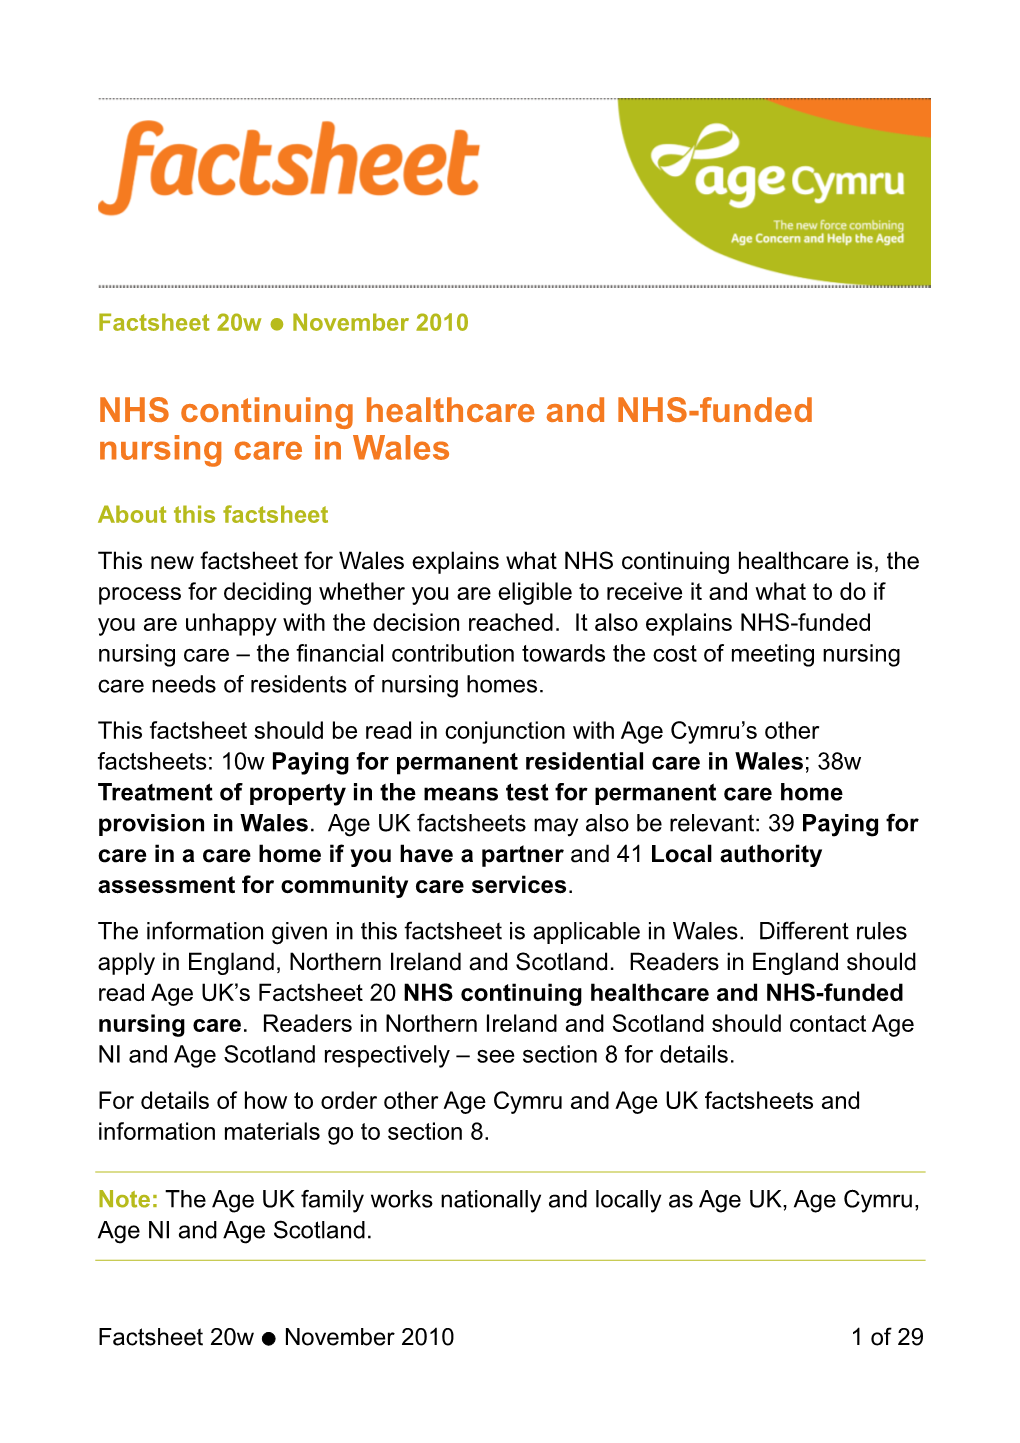 NHS Continuing Healthcare and NHS-Funded Nursing Care in Wales